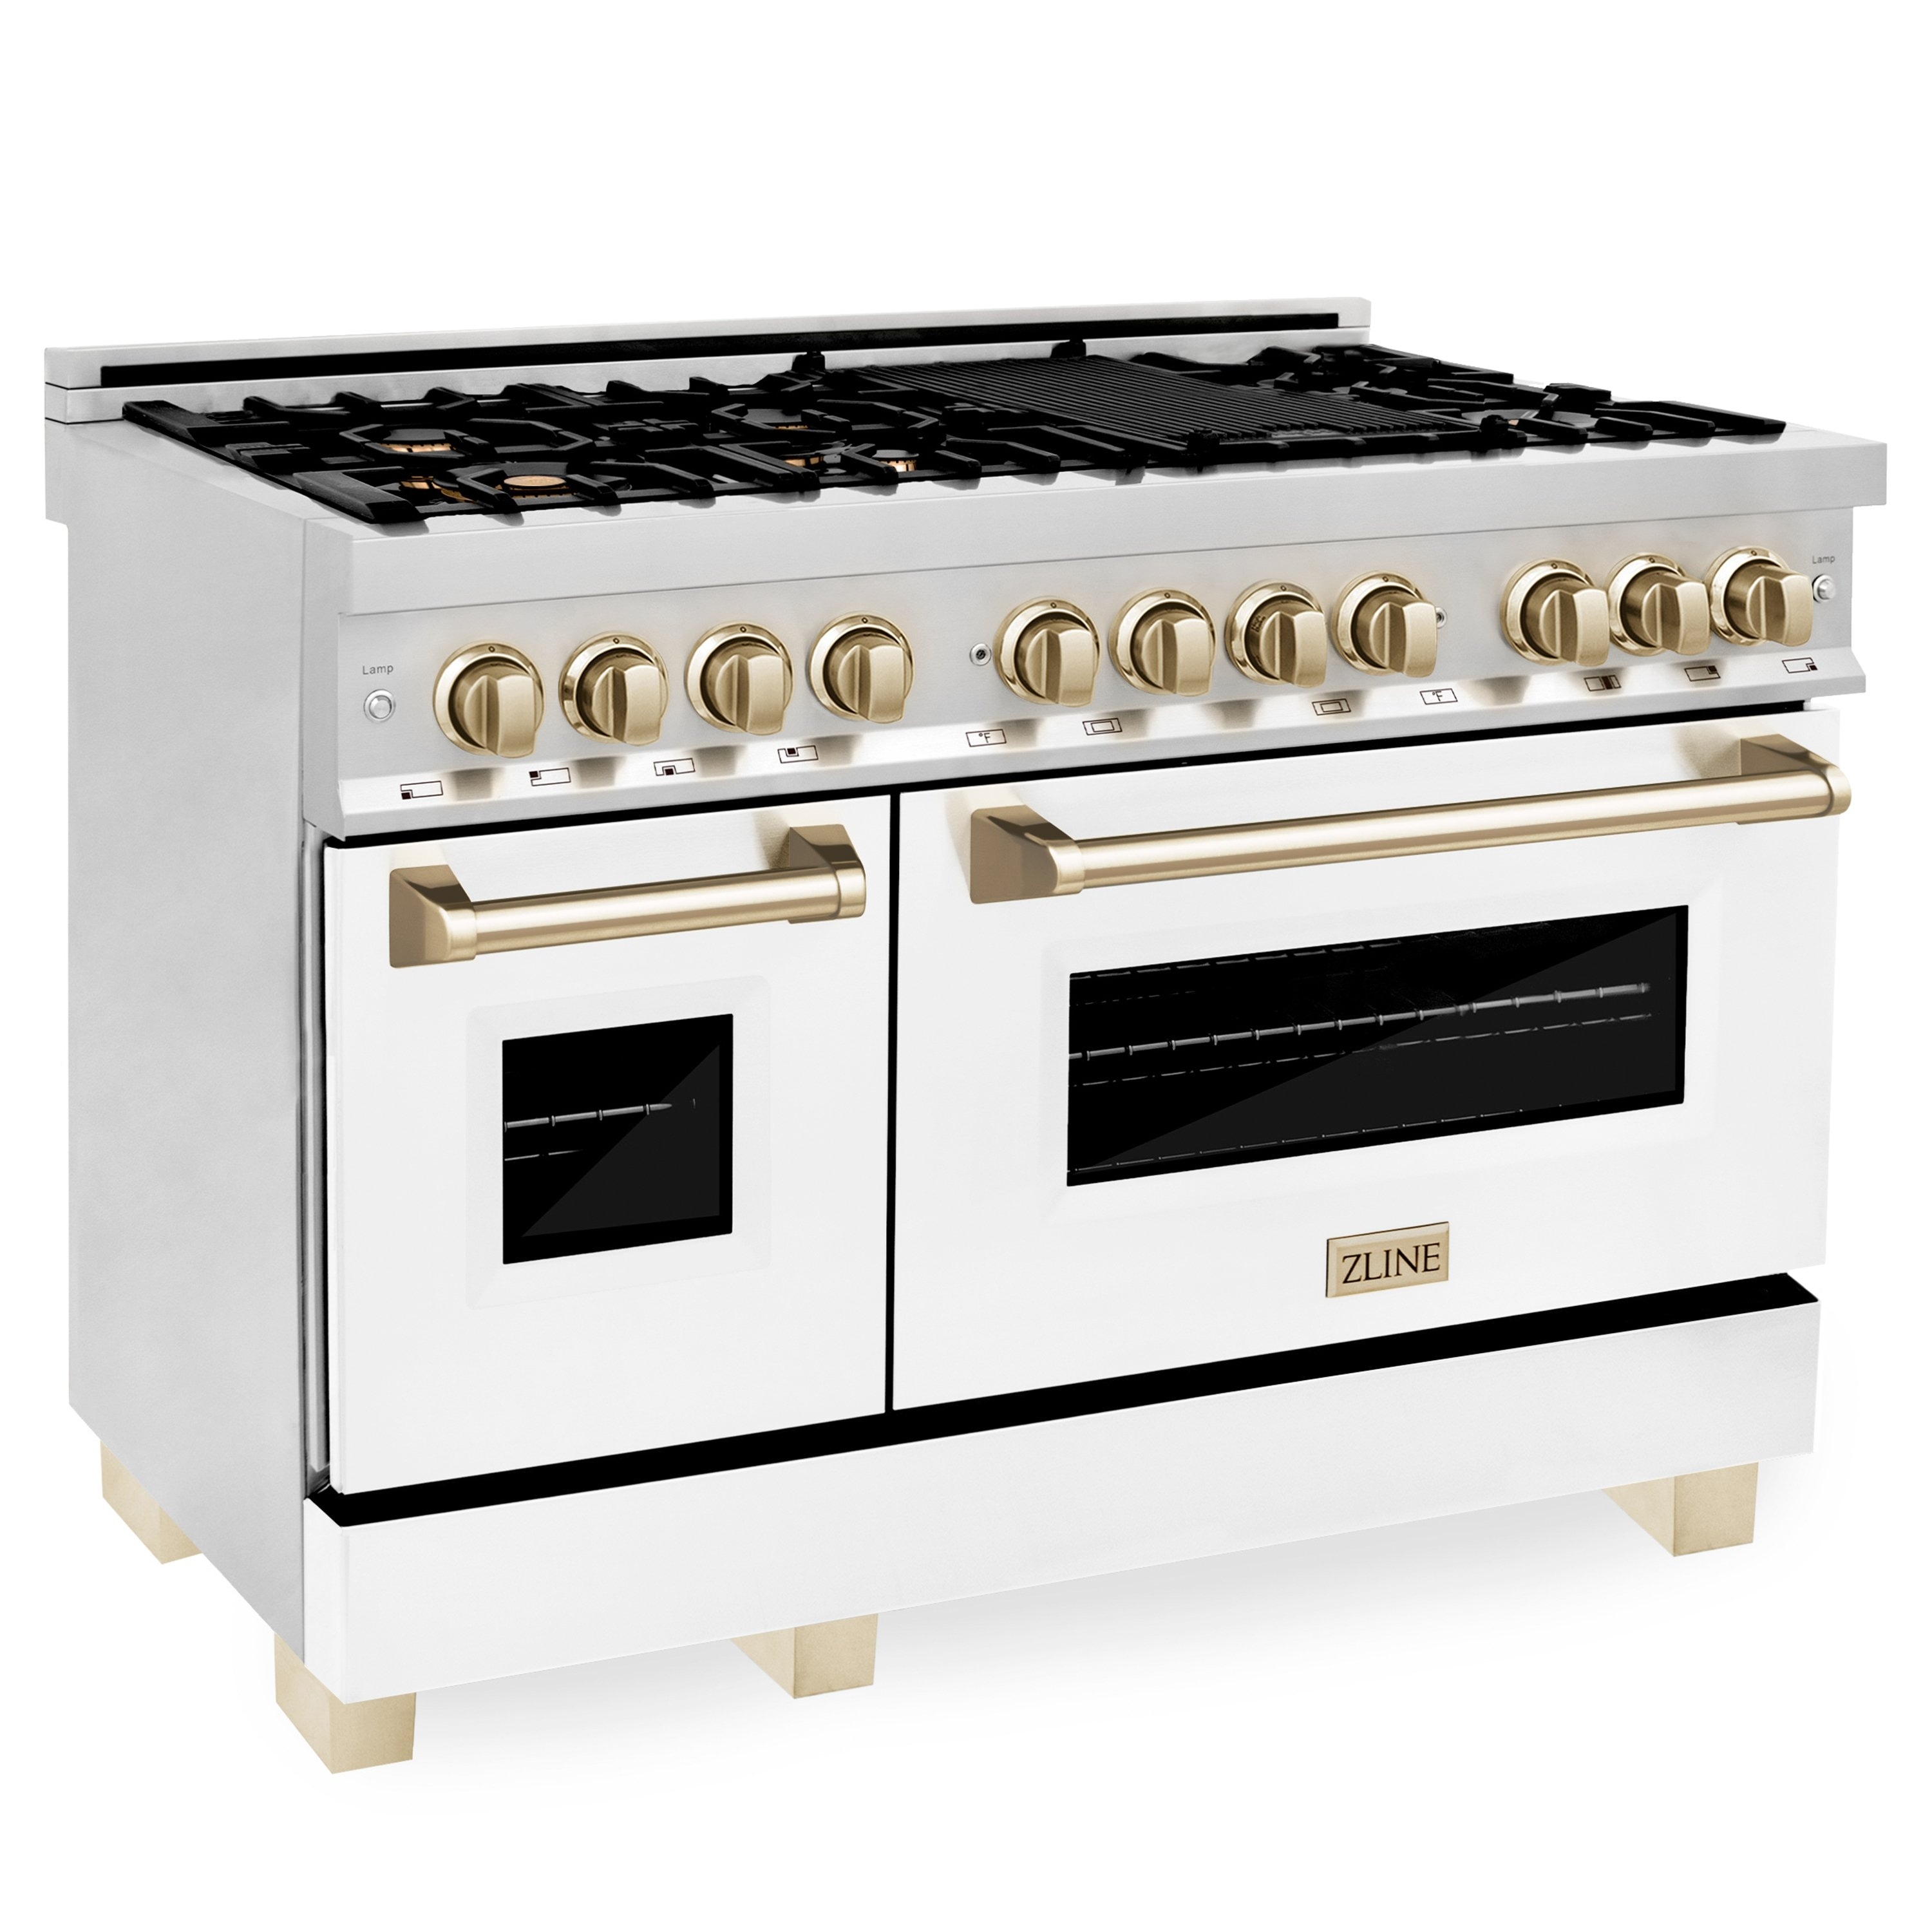 Zline Kitchen and Bath ZLINE Autograph Edition 48" Dual Fuel Range in Stainless Steel, White Matte with Accents